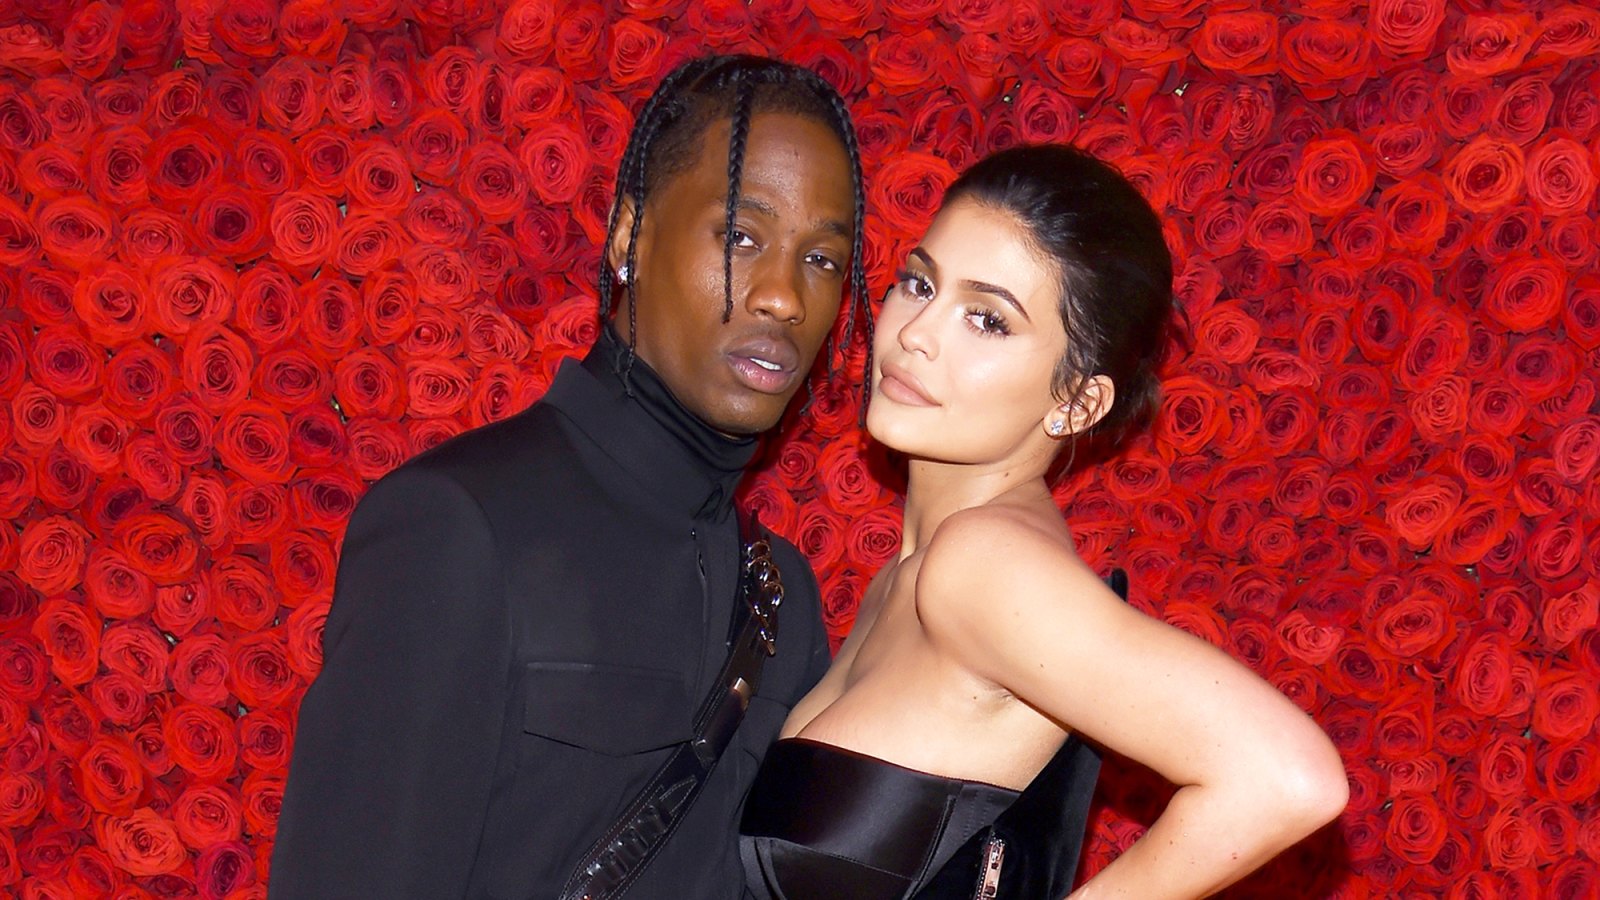 Travis Scott and Kylie Jenner attend the Heavenly Bodies: Fashion & The Catholic Imagination Costume Institute Gala at The Metropolitan Museum of Art on May 7, 2018 in New York City.